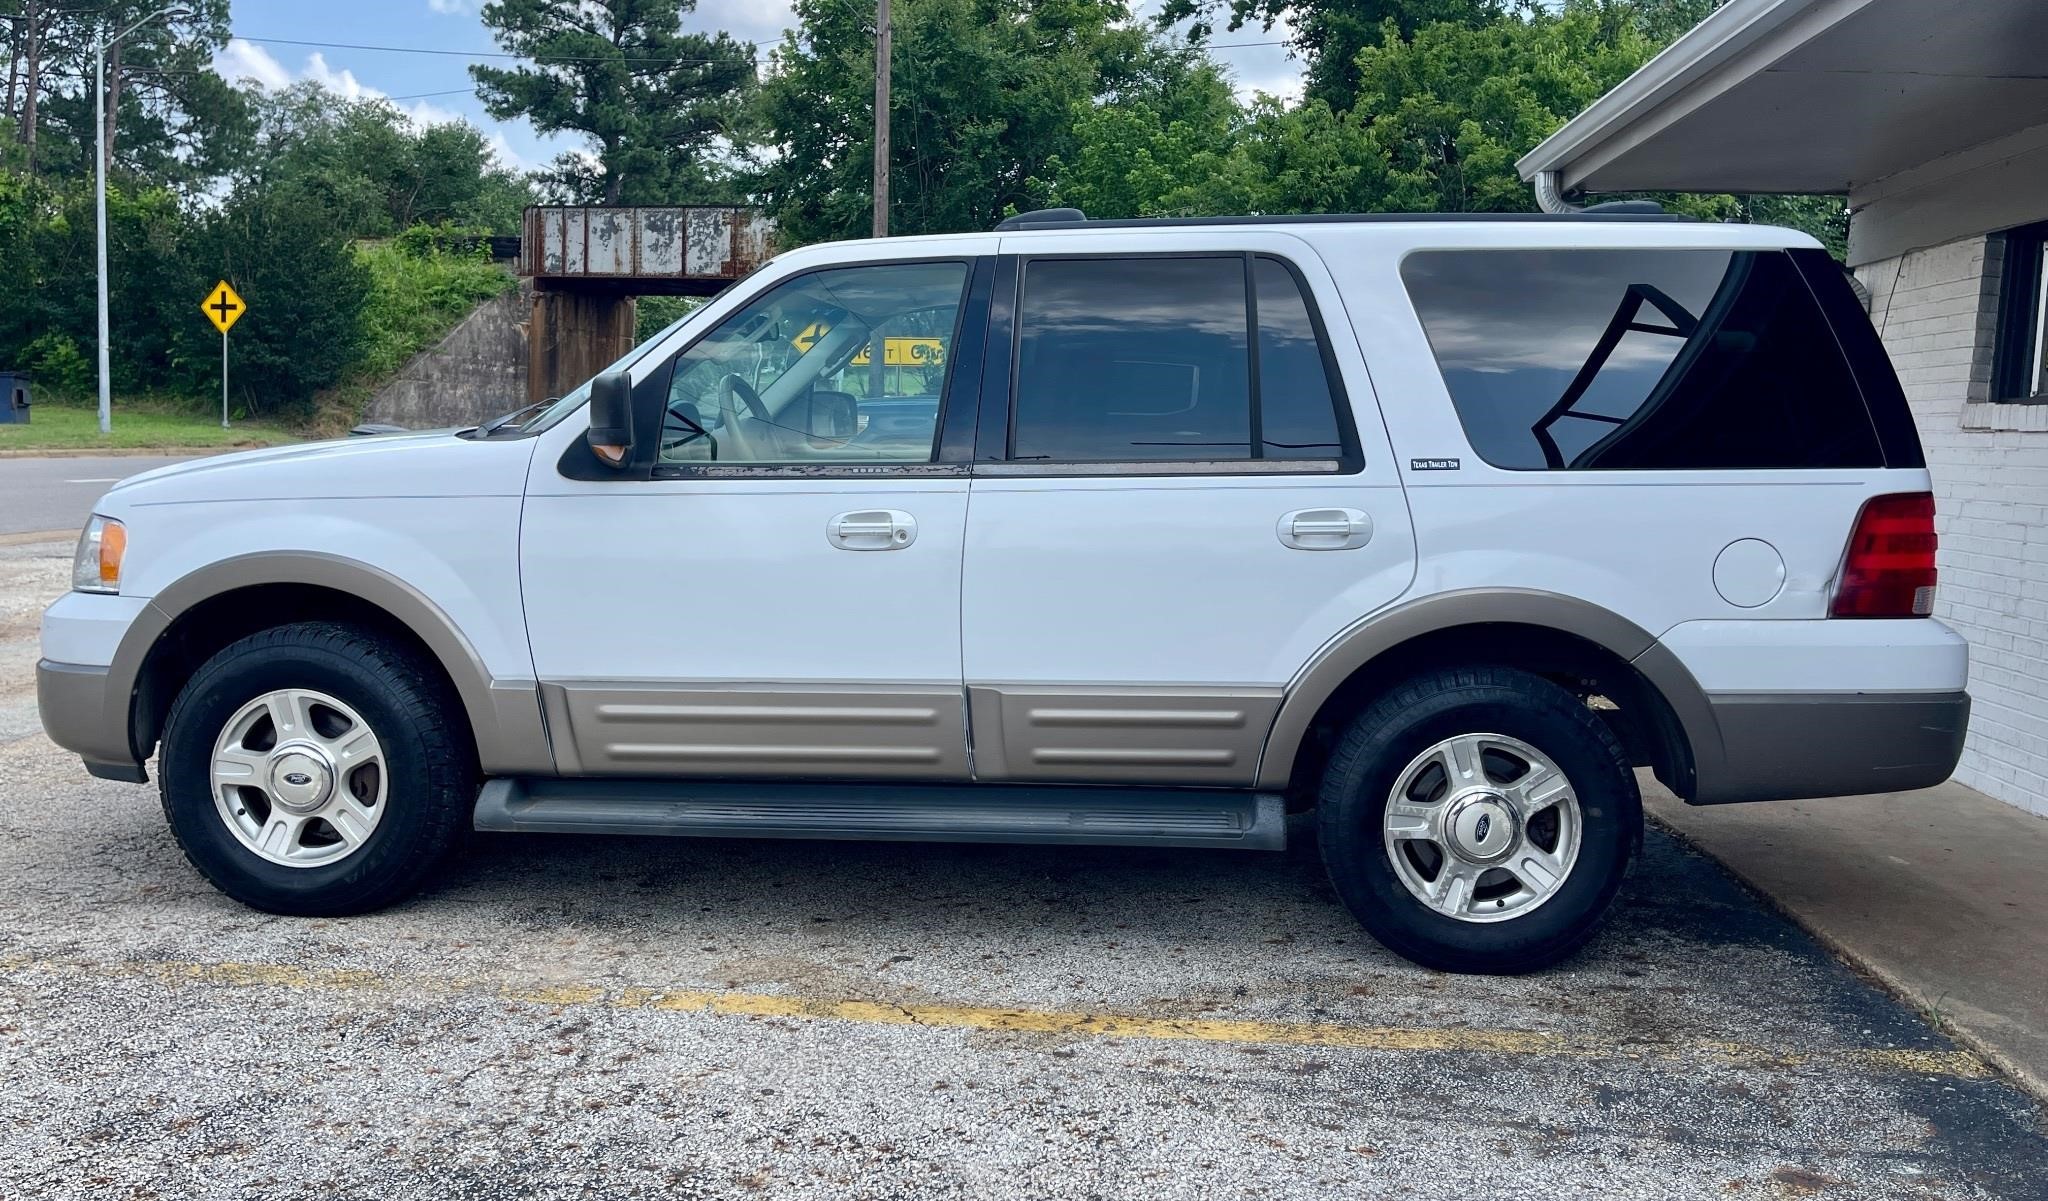 2003 Ford Expedition 5.4L V8 Eddie Bauer Edition